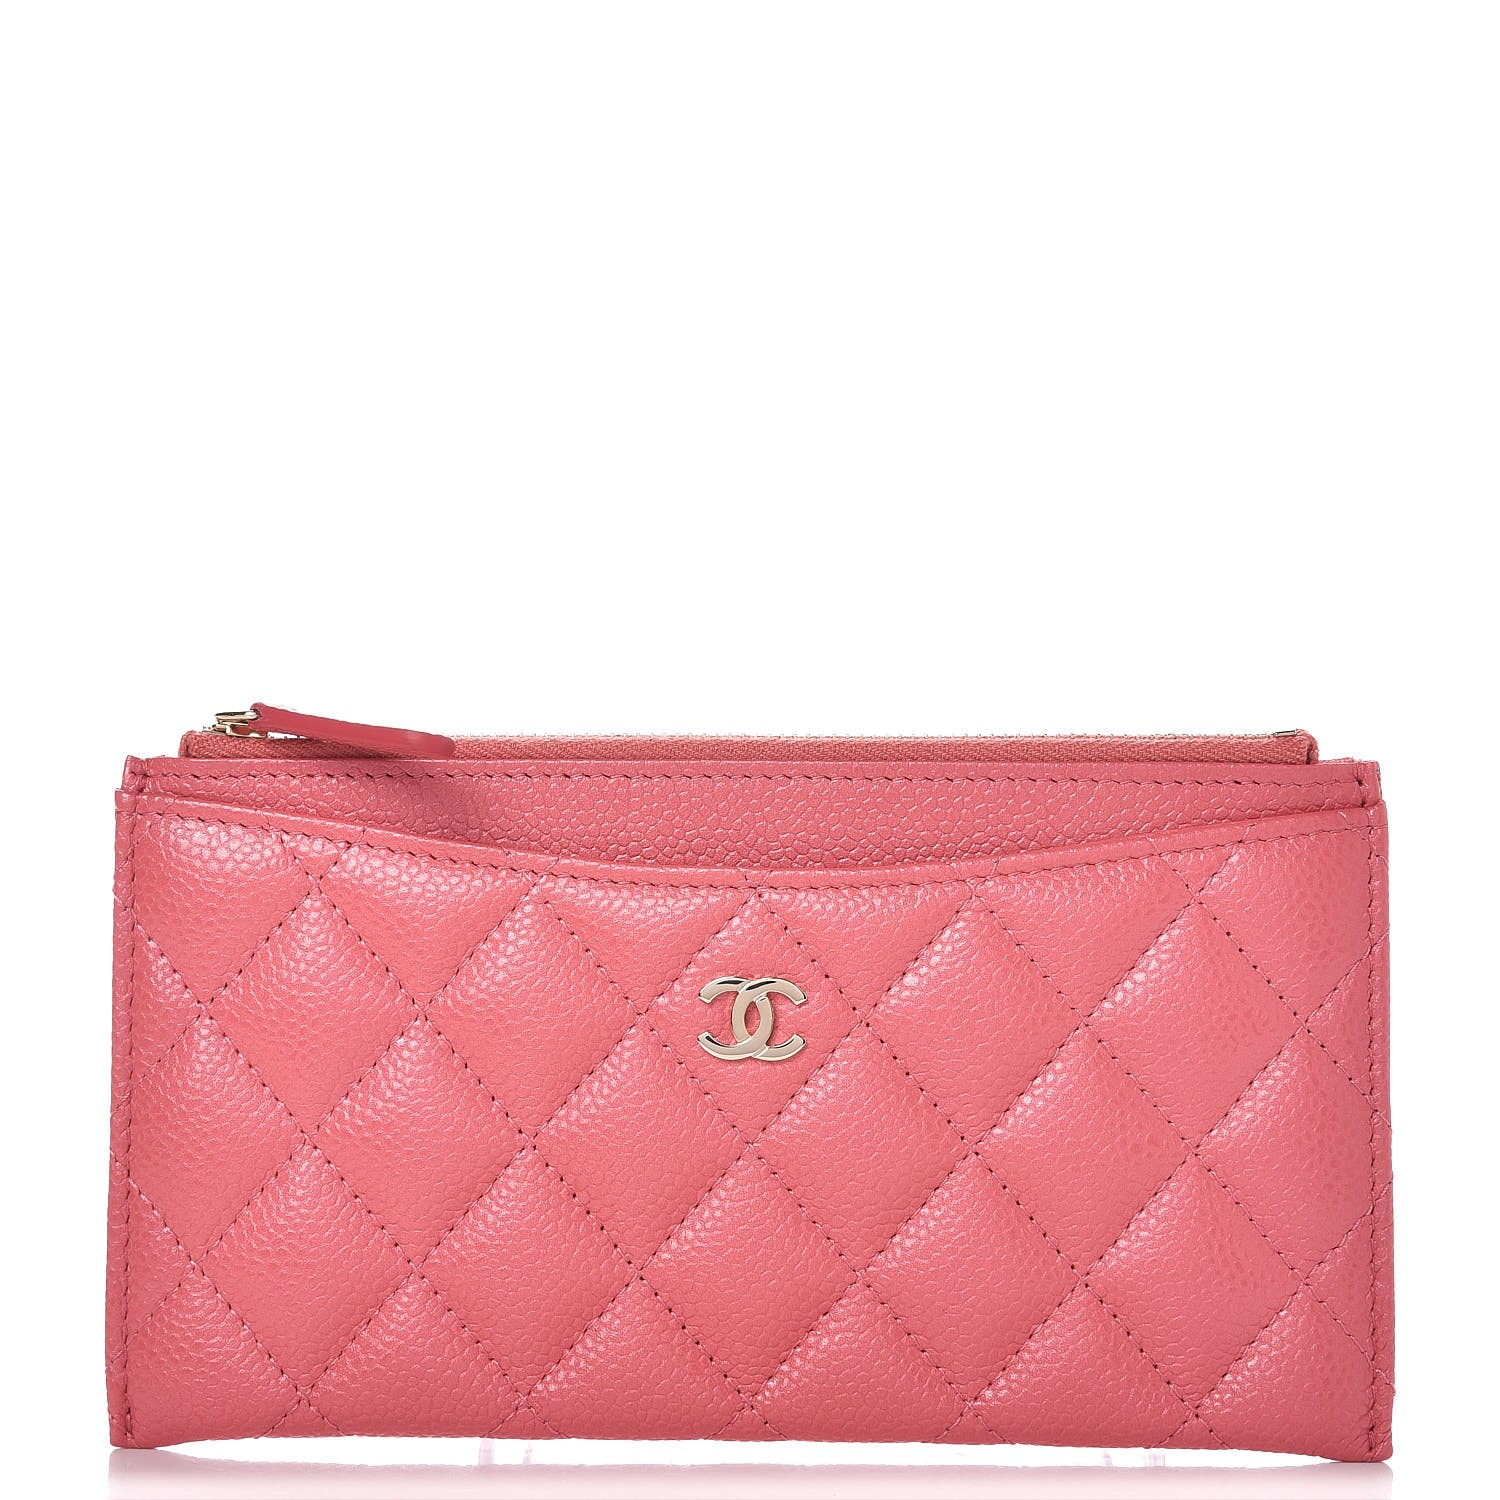 Chanel 19s Iridescent Pink Key card Holder, Women's Fashion, Bags